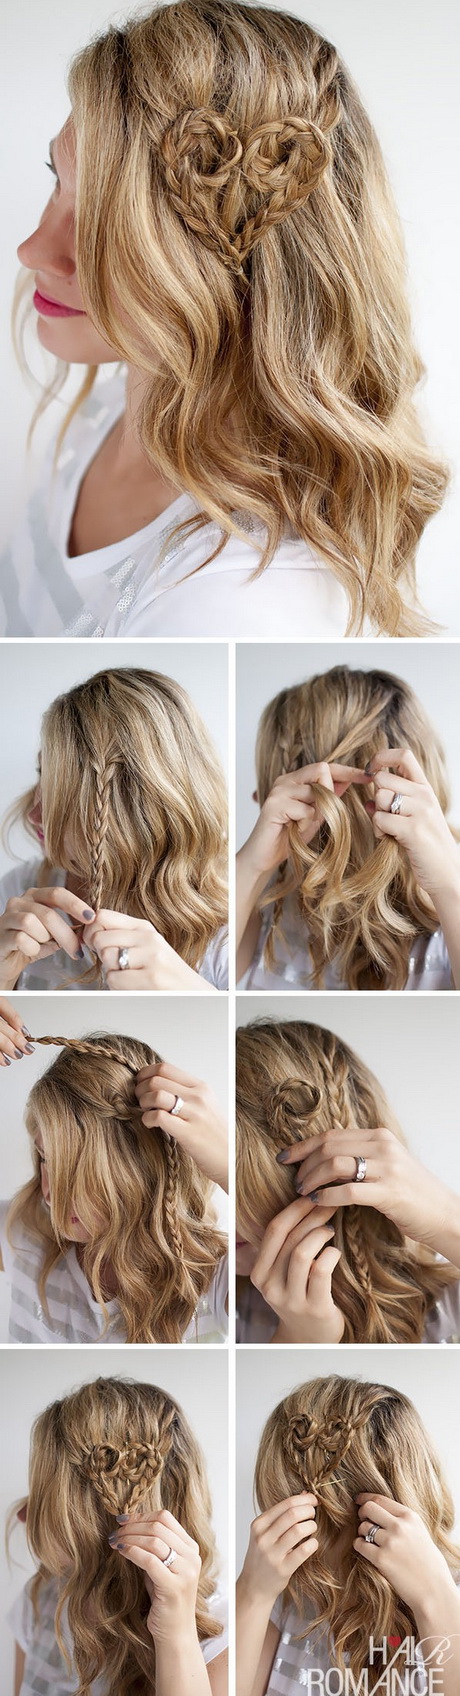 step-by-step-prom-hairstyles-74_13 Step by step prom hairstyles